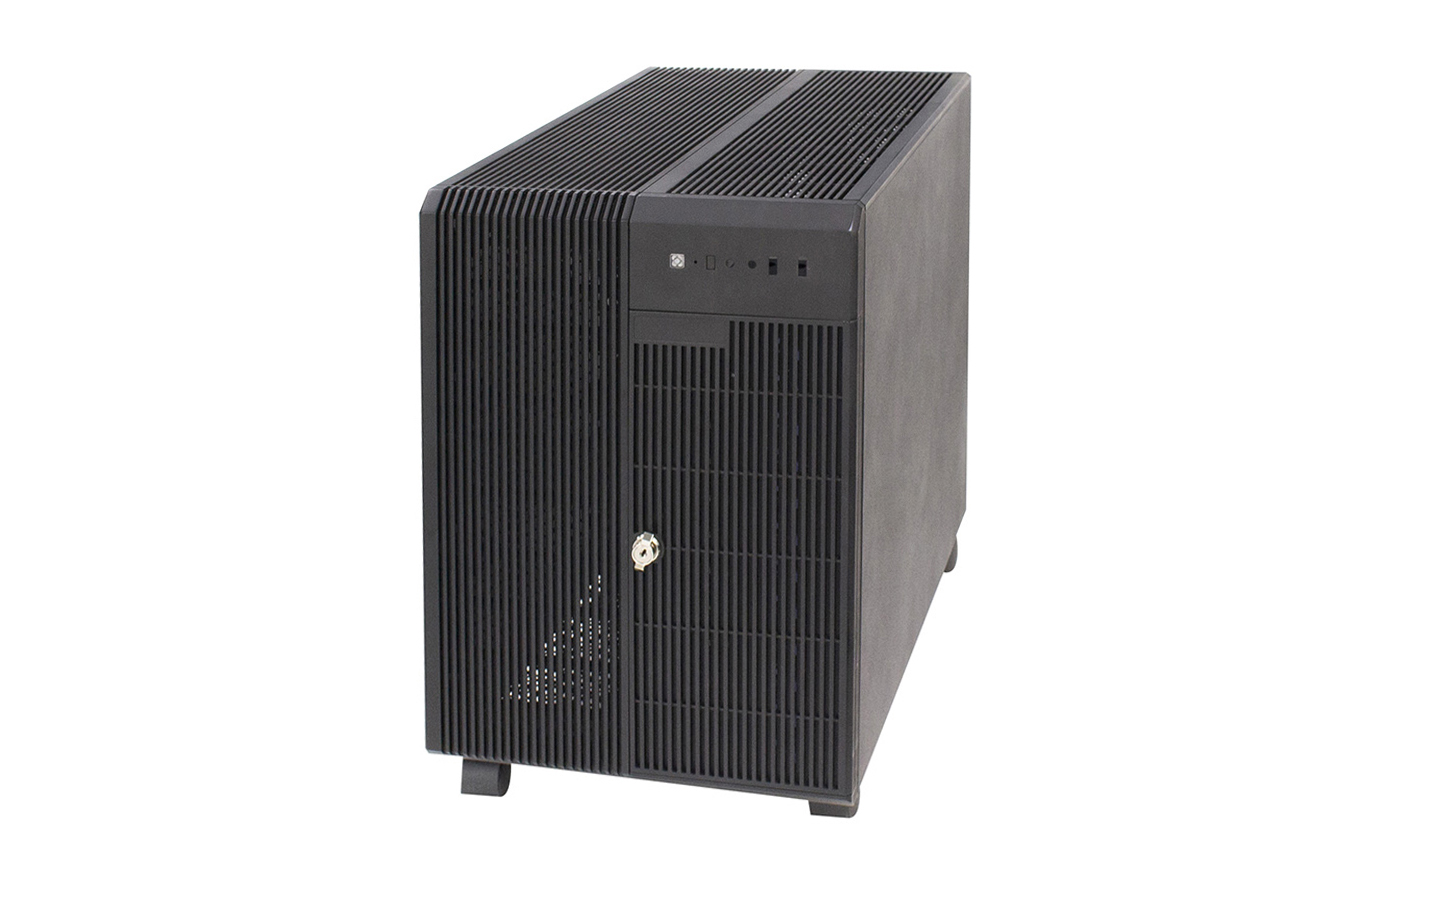 Dual tower server chassis